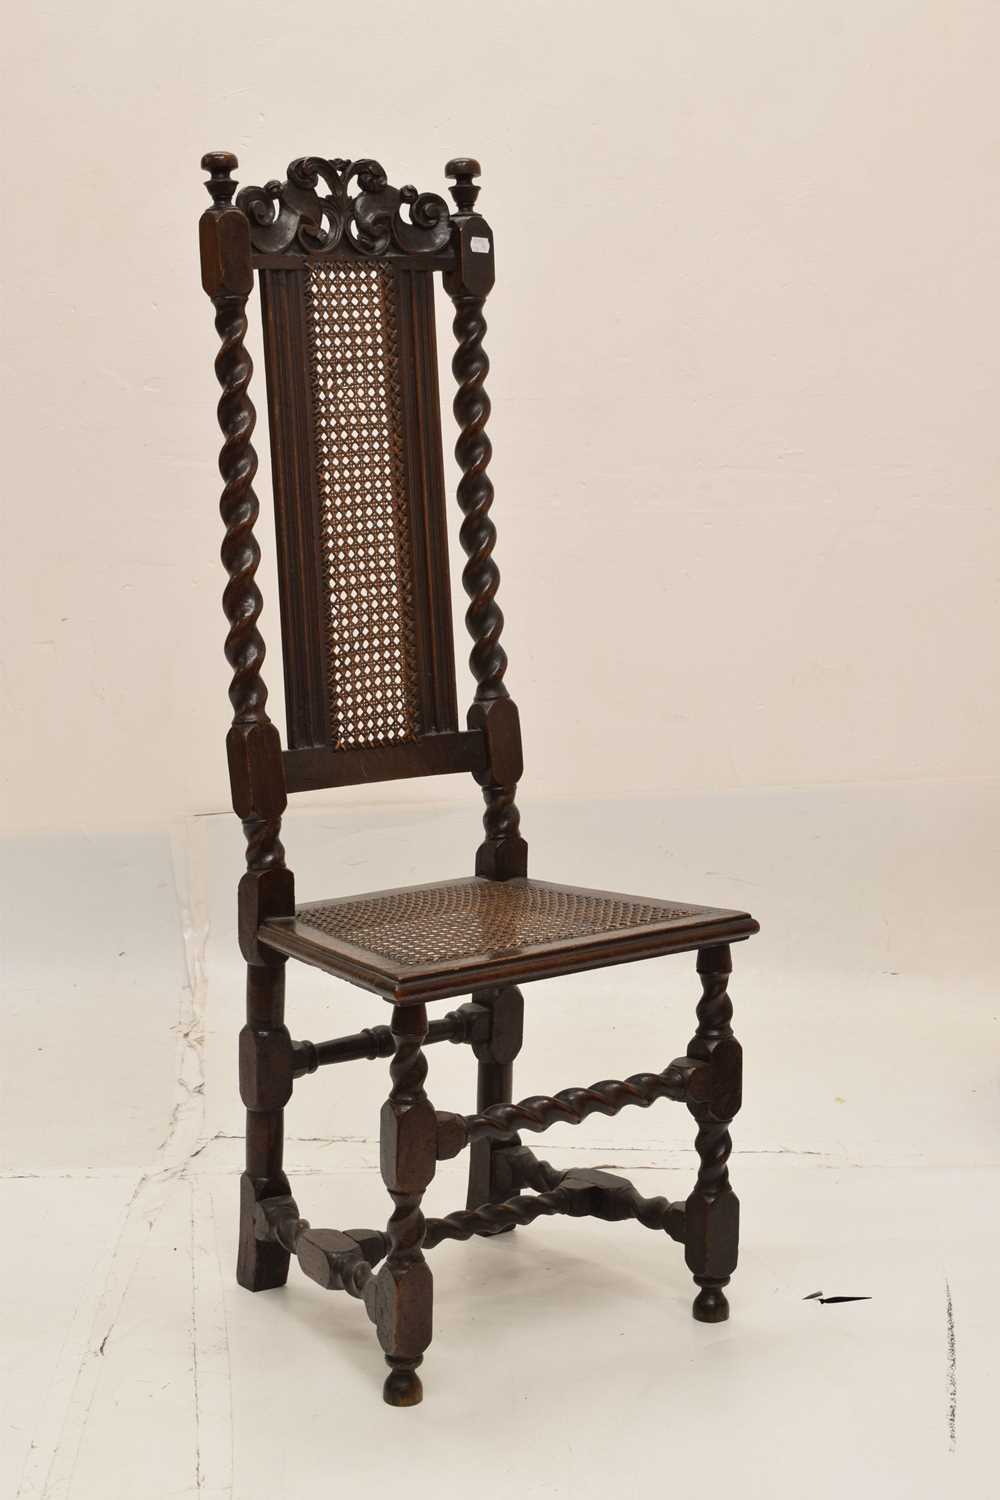 Late 17th century walnut and cane high-back chair - Image 15 of 15